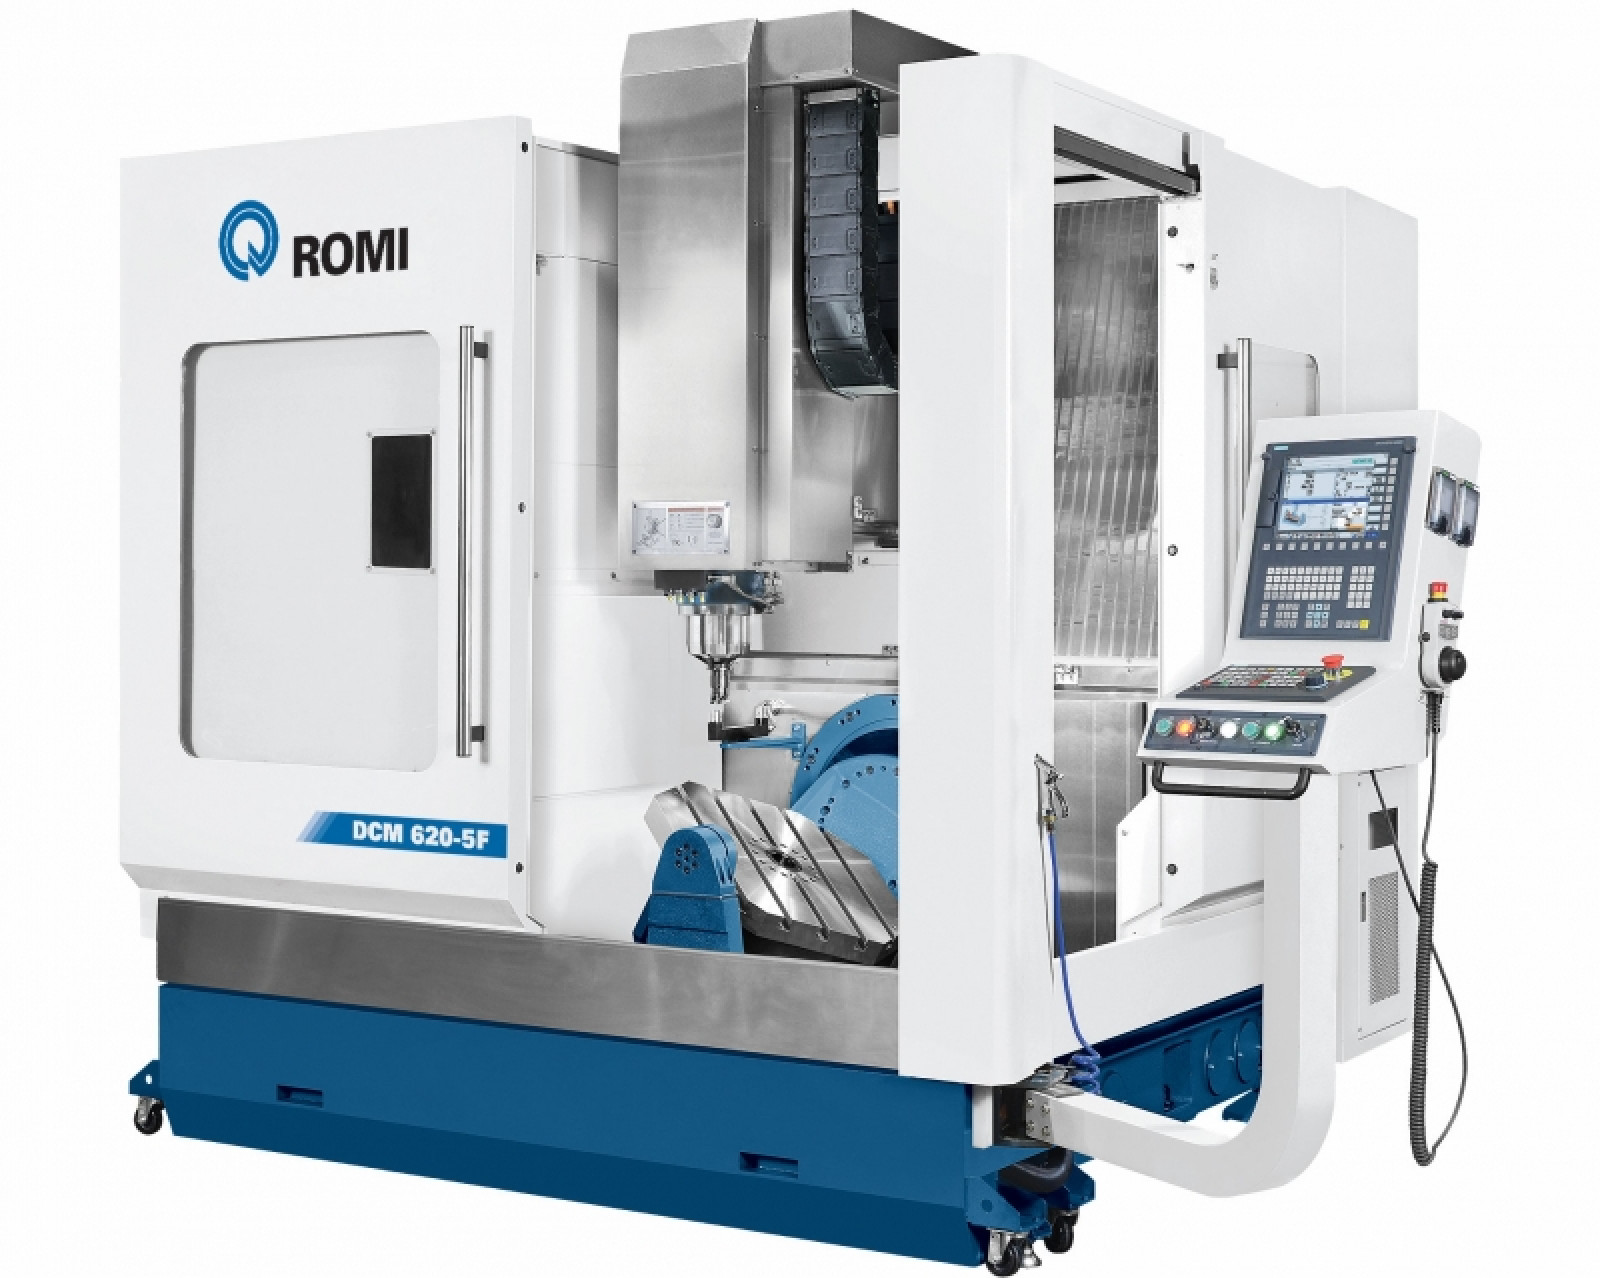 Romi at Southern Manufacturing 2017